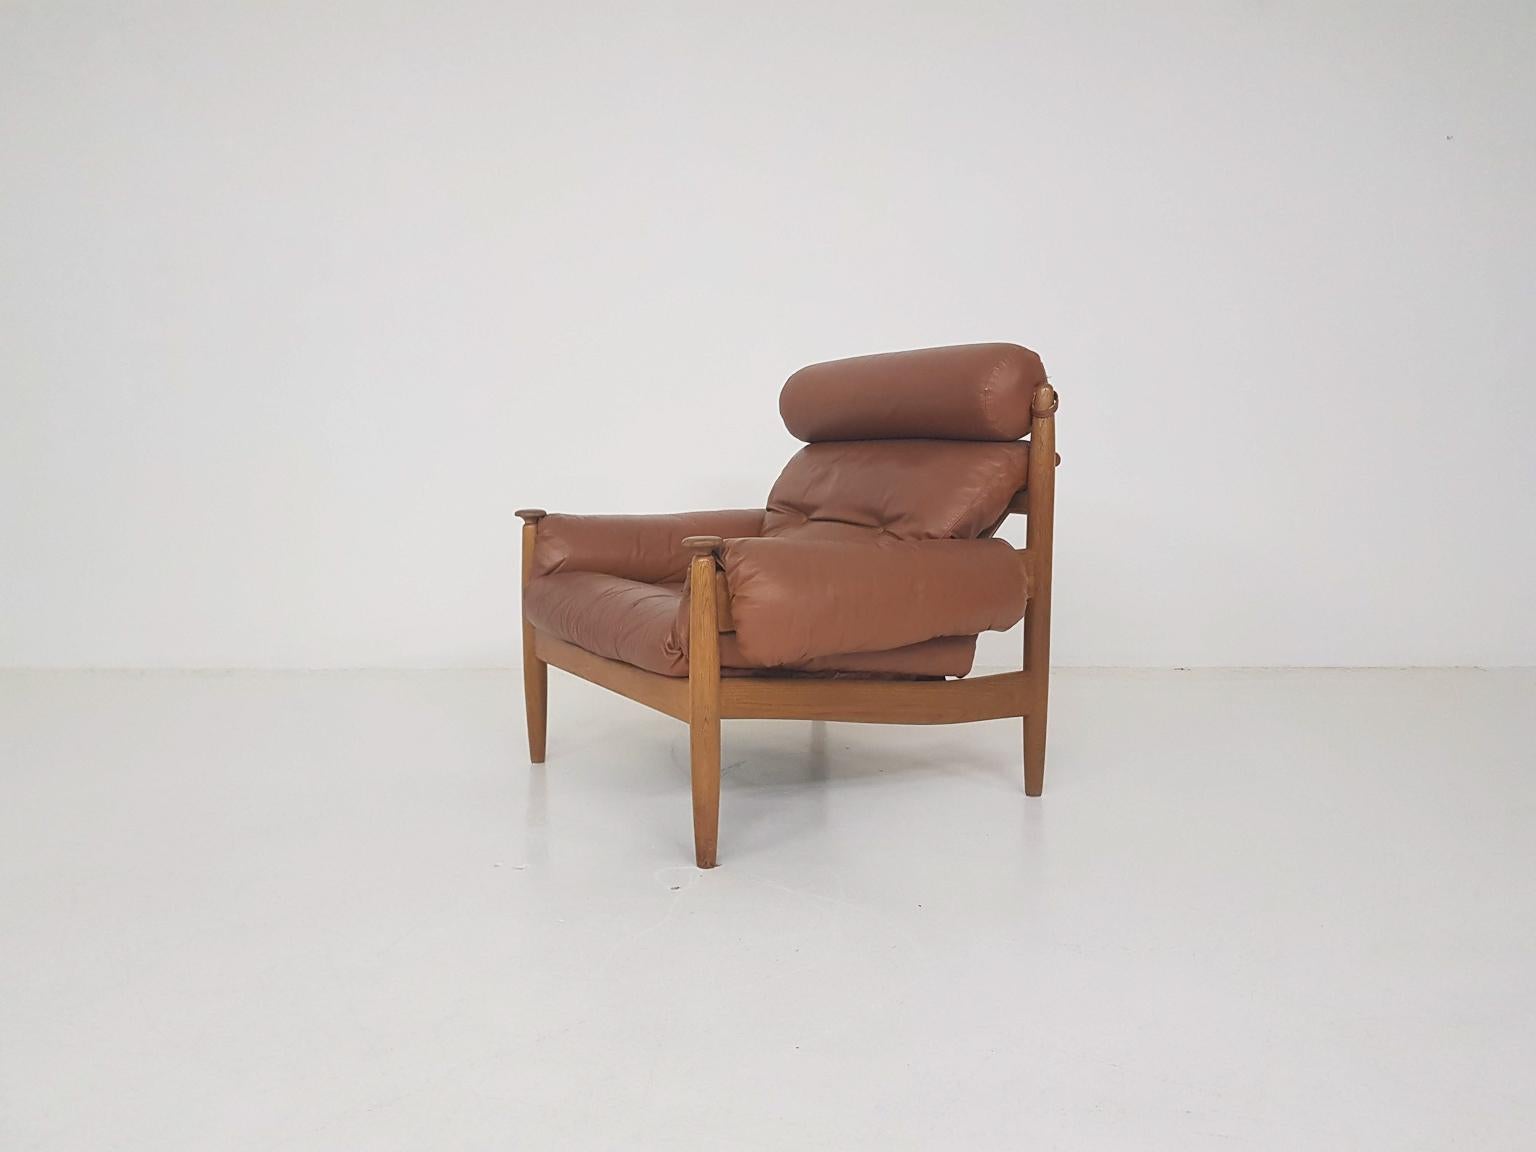 Lounge chair made of brown leather and wood attributed to Eric Merthen for IRE Mobler, Sweden.

Just like the Brazilian Sergio Rodrigues his 'Sheriff' lounge chair and the designs of Percival Lafer this one has a nice combination of the minimal